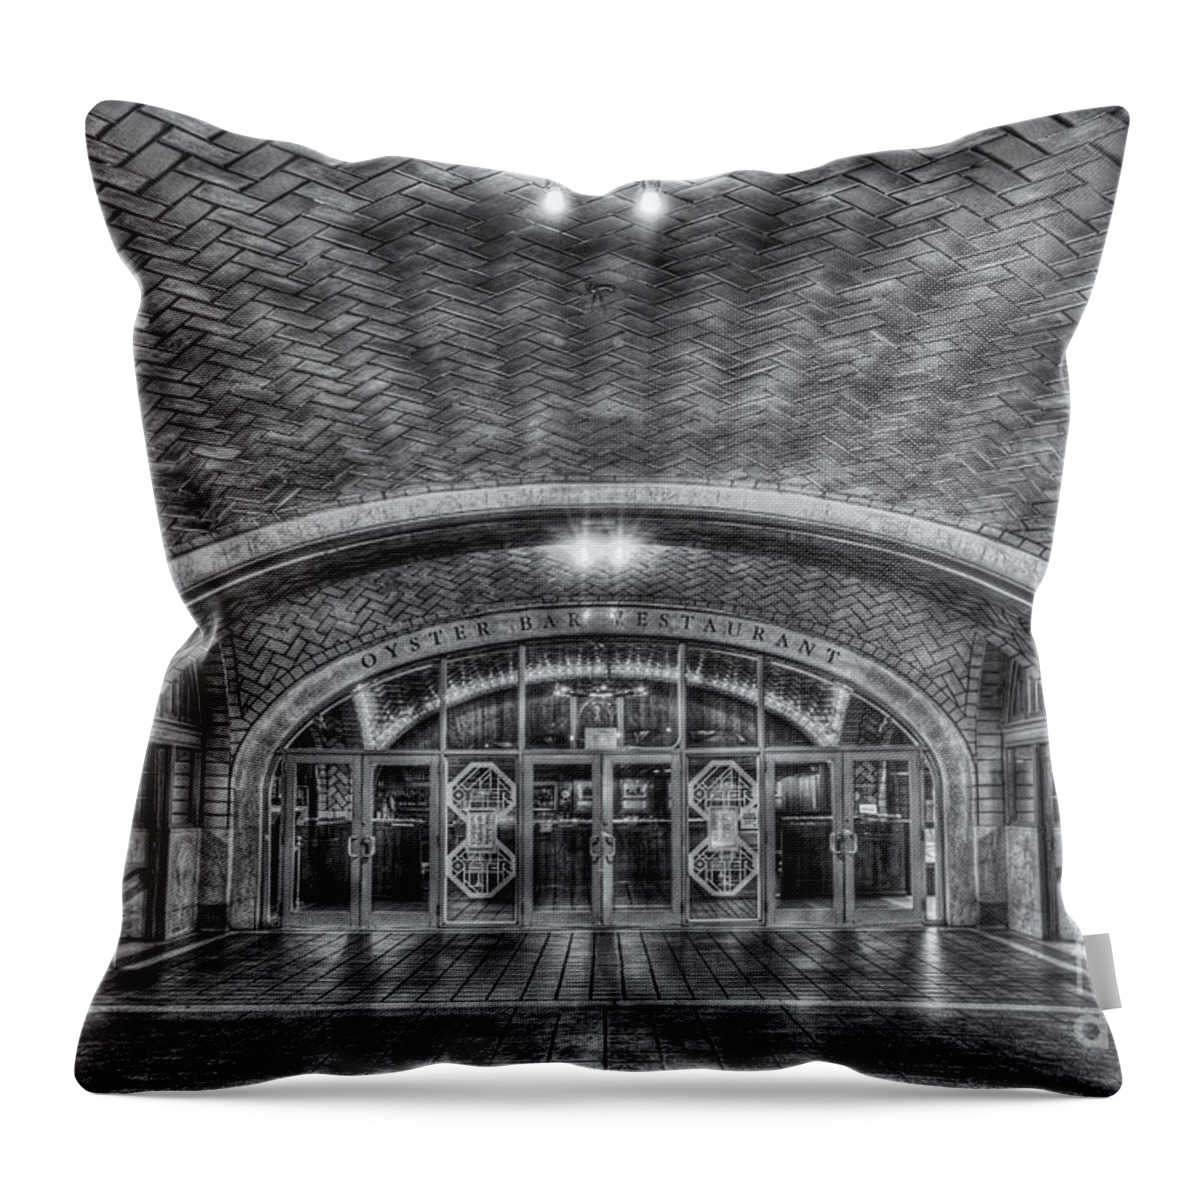 Clarence Holmes Throw Pillow featuring the photograph Oyster Bar Restaurant II by Clarence Holmes